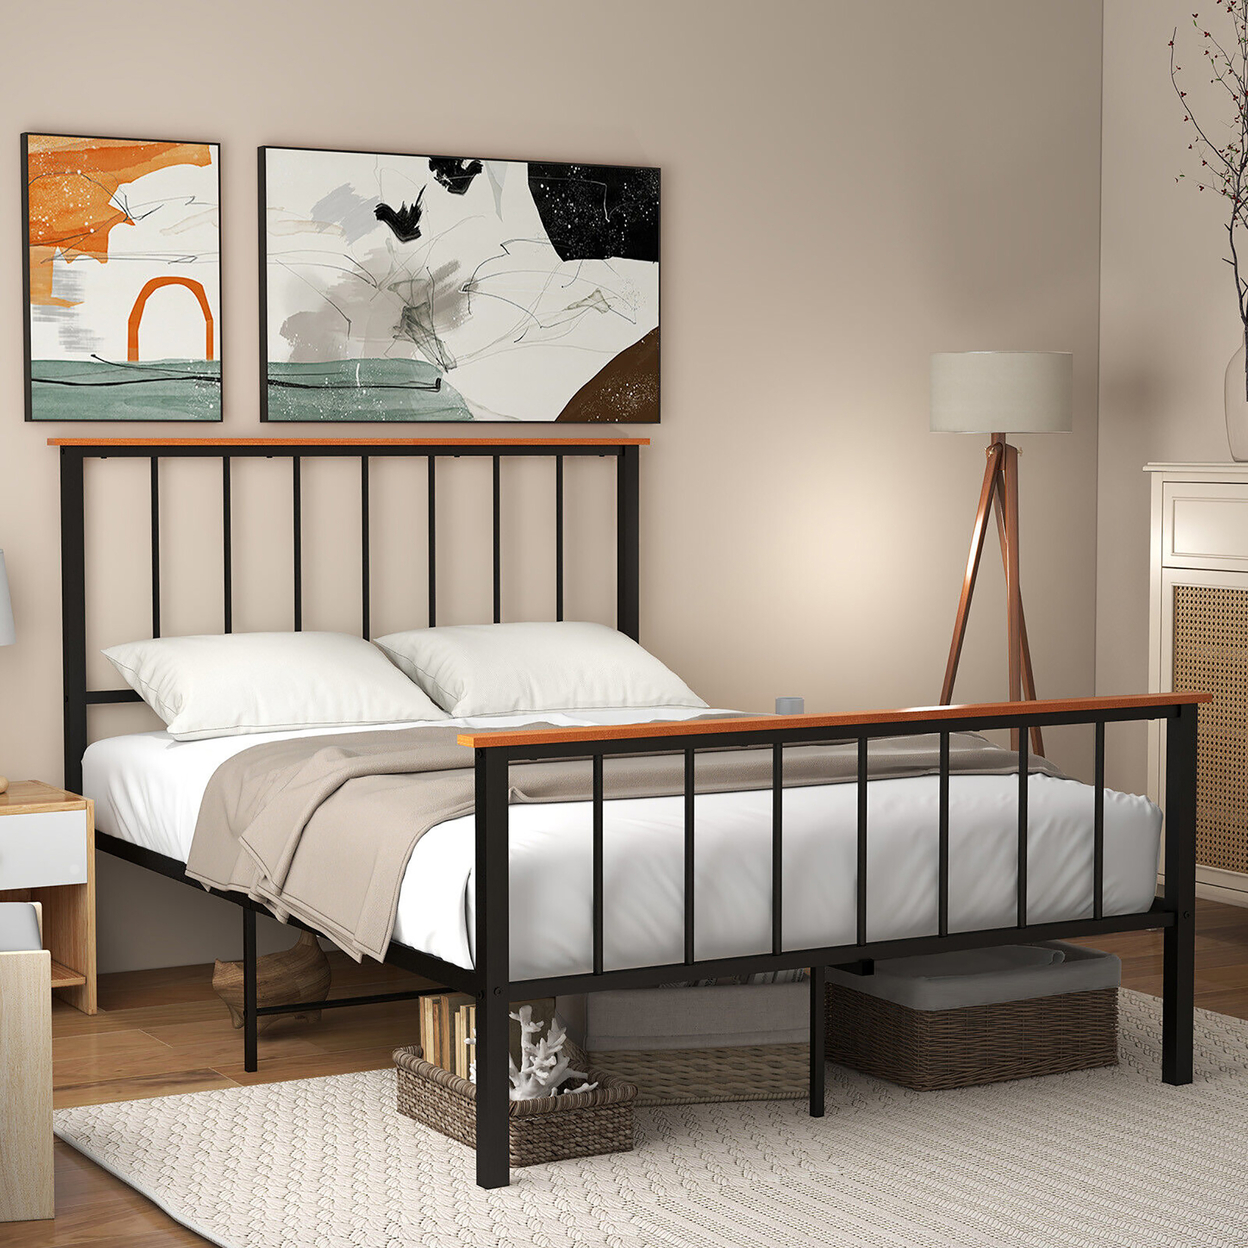 Full/Queen Size Metal Platform Bed Frame Mattress Foundation With Headboard Industrial - Full